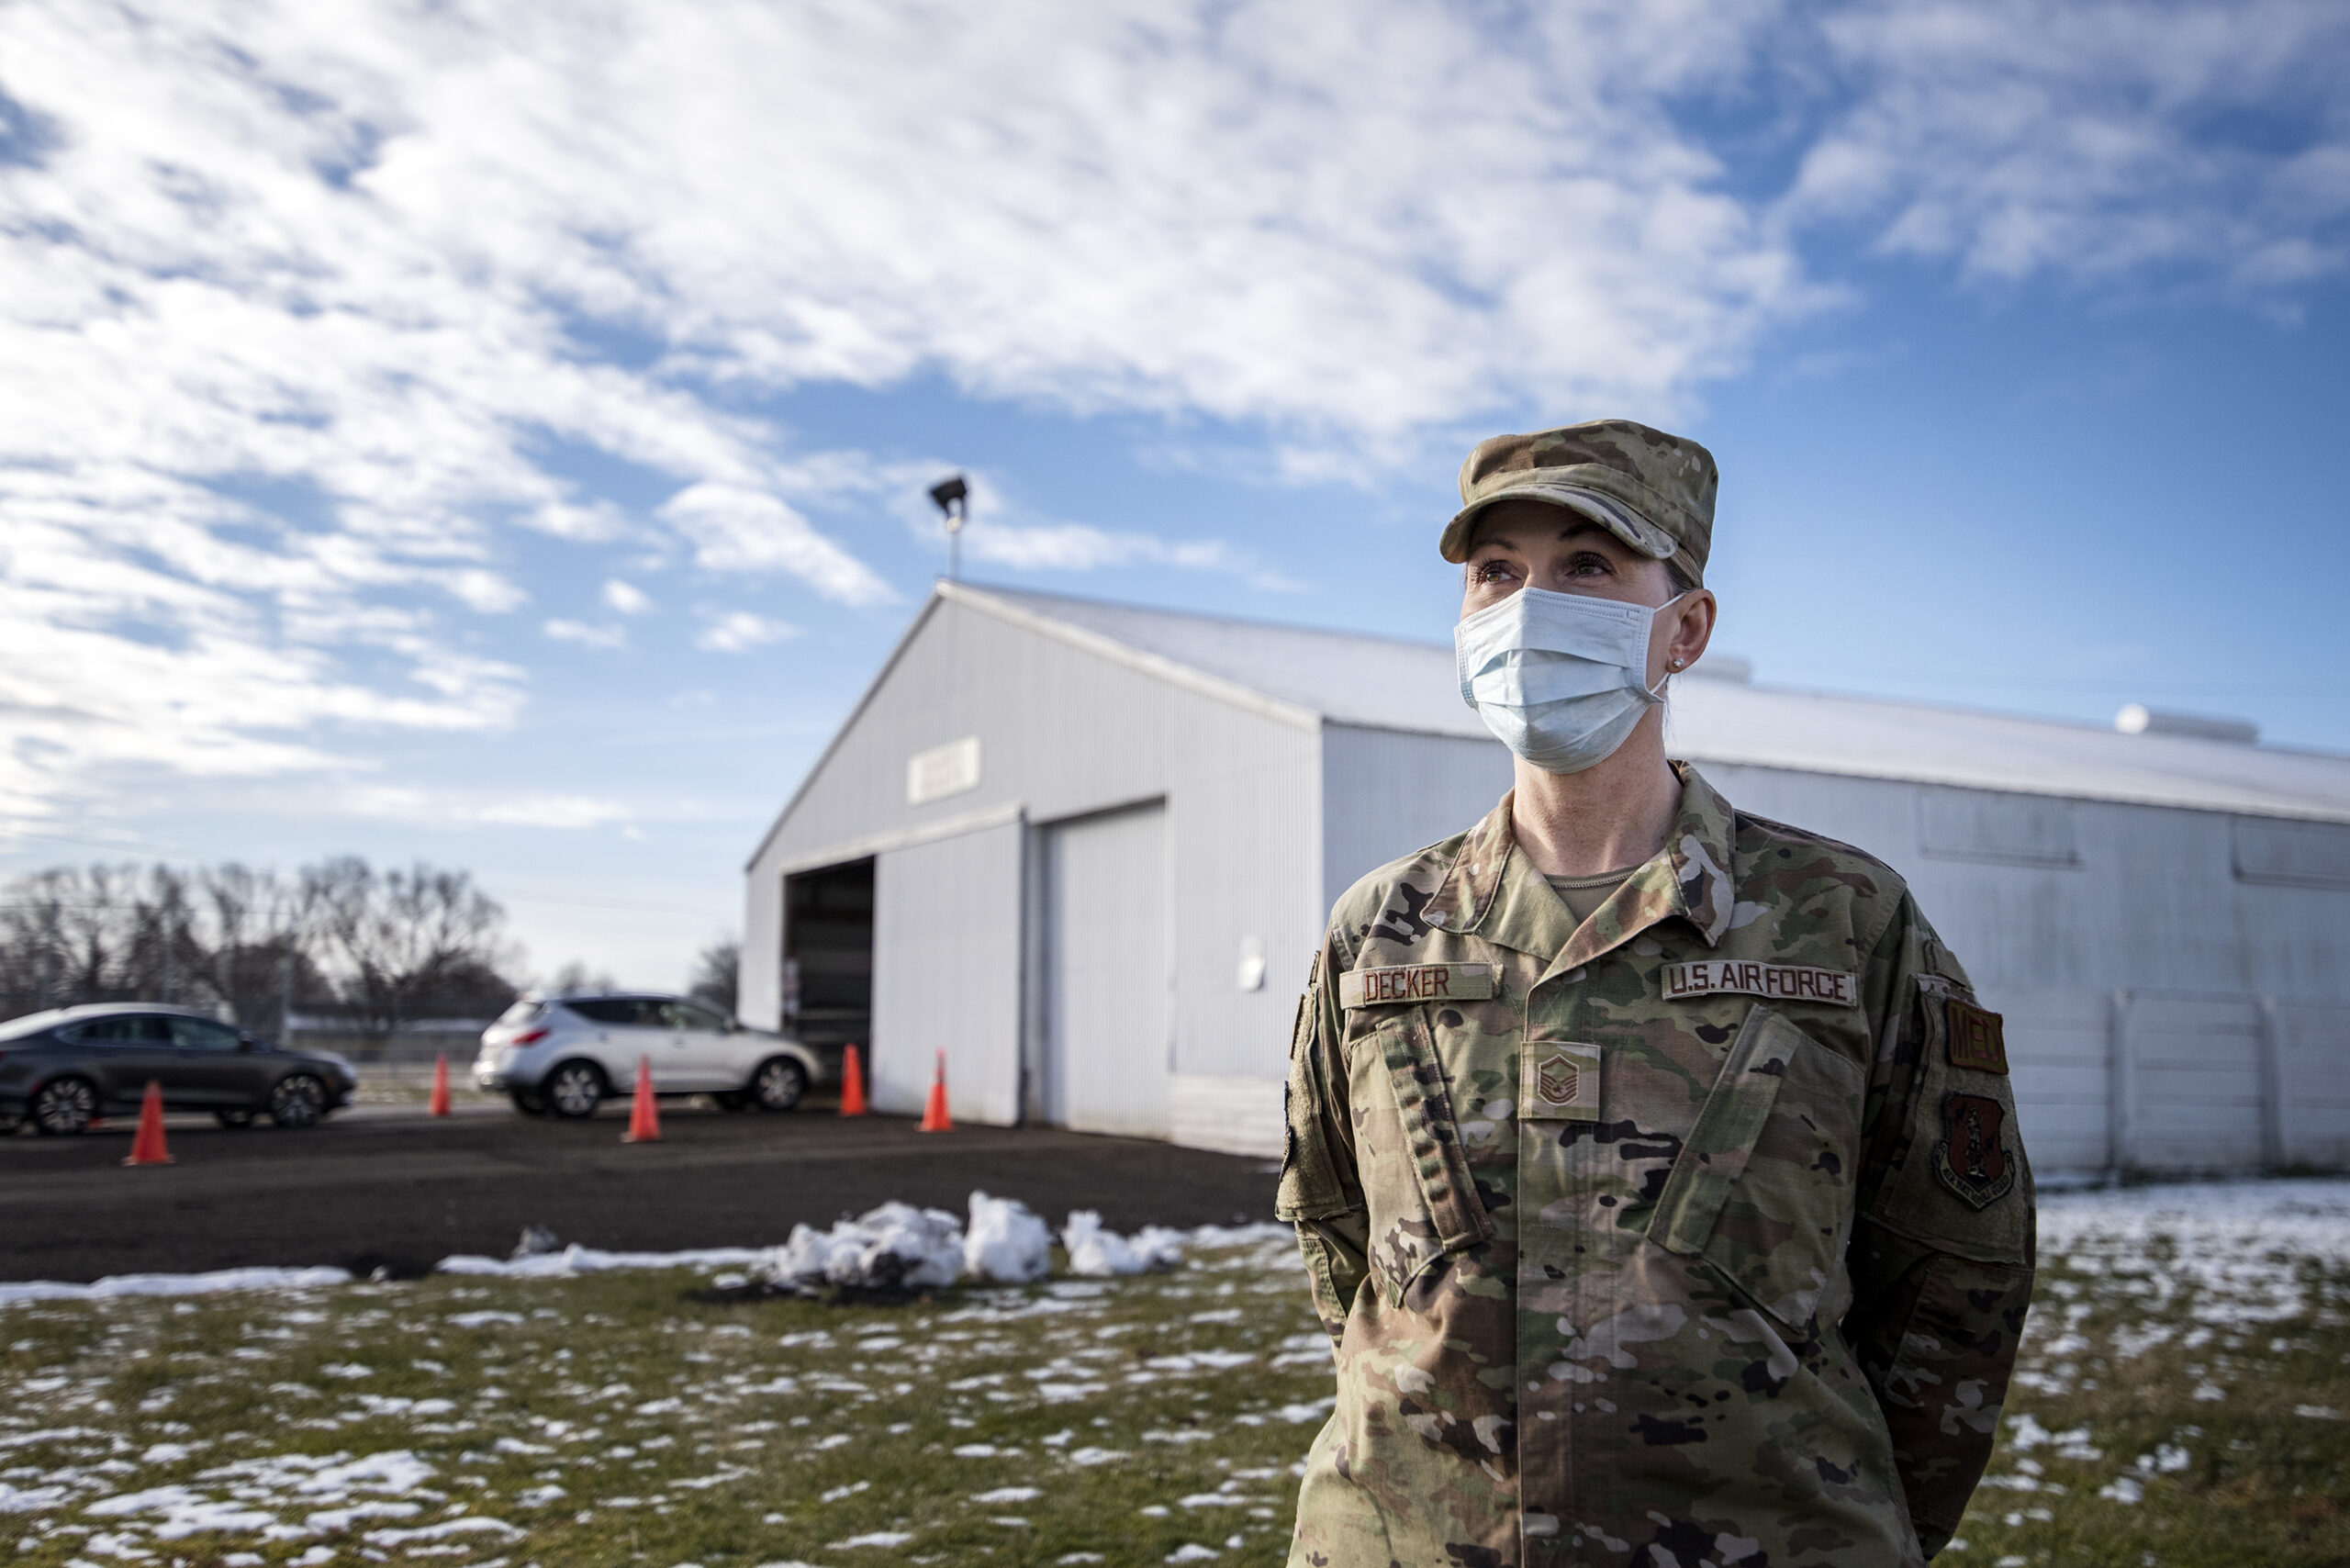 A woman in a military uniform stands near a barn that has been repurposed as a drive-thru testing site